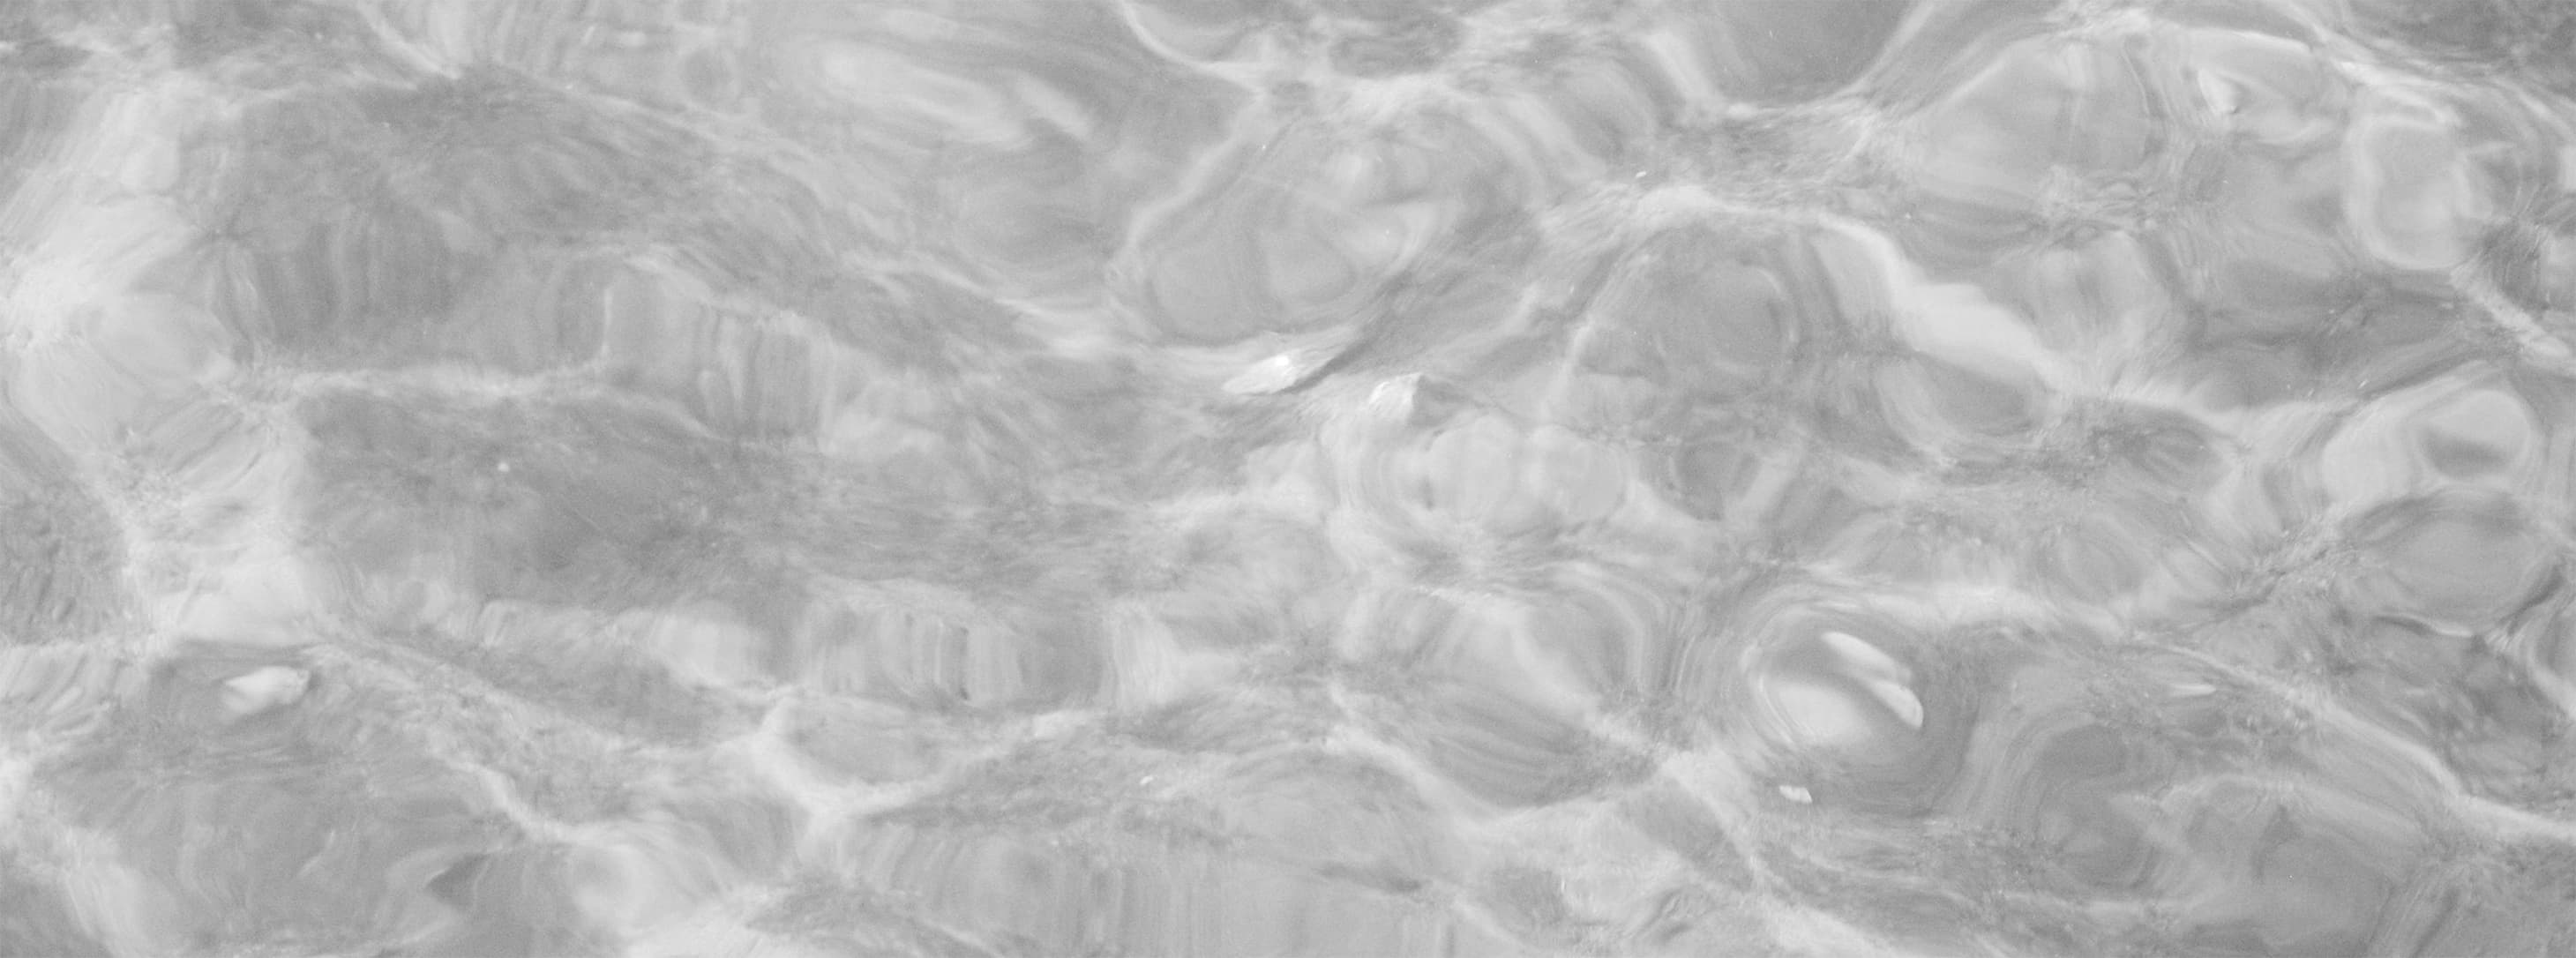 Water detail for background image in footer